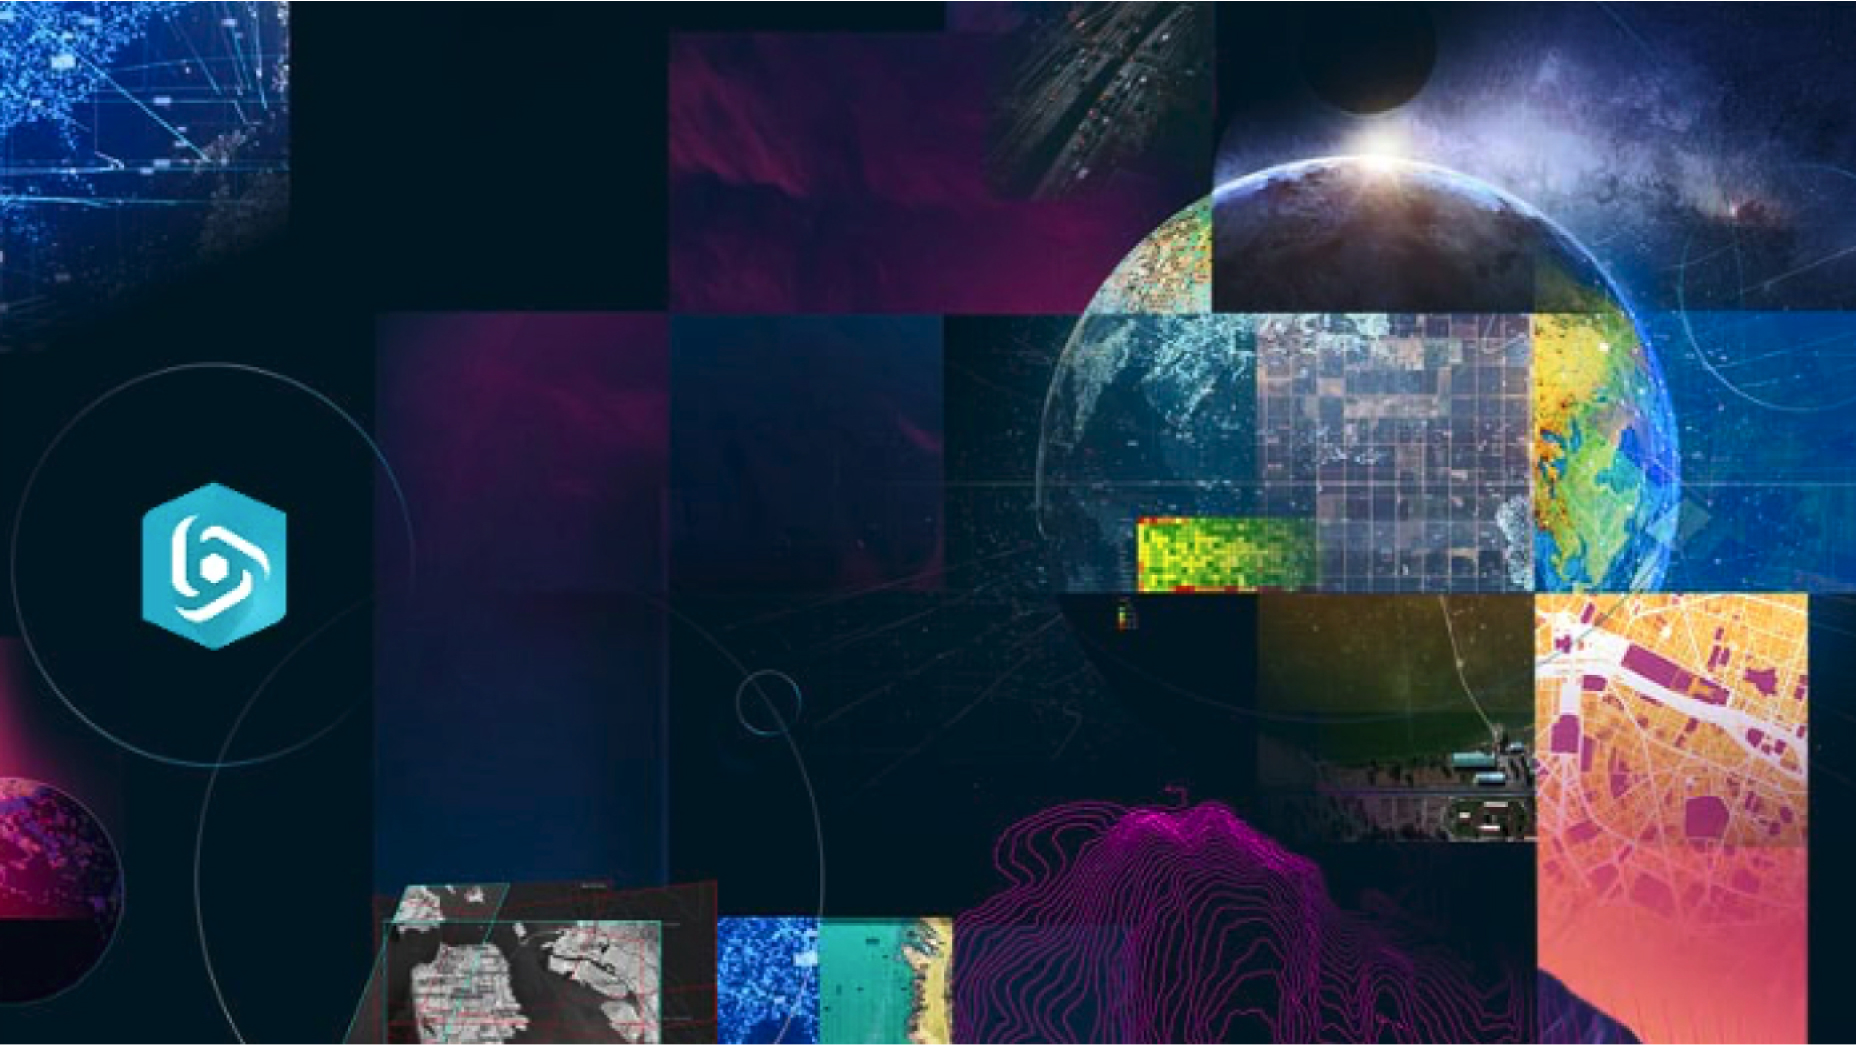 Abstract image with squares and different colors on top of a globe